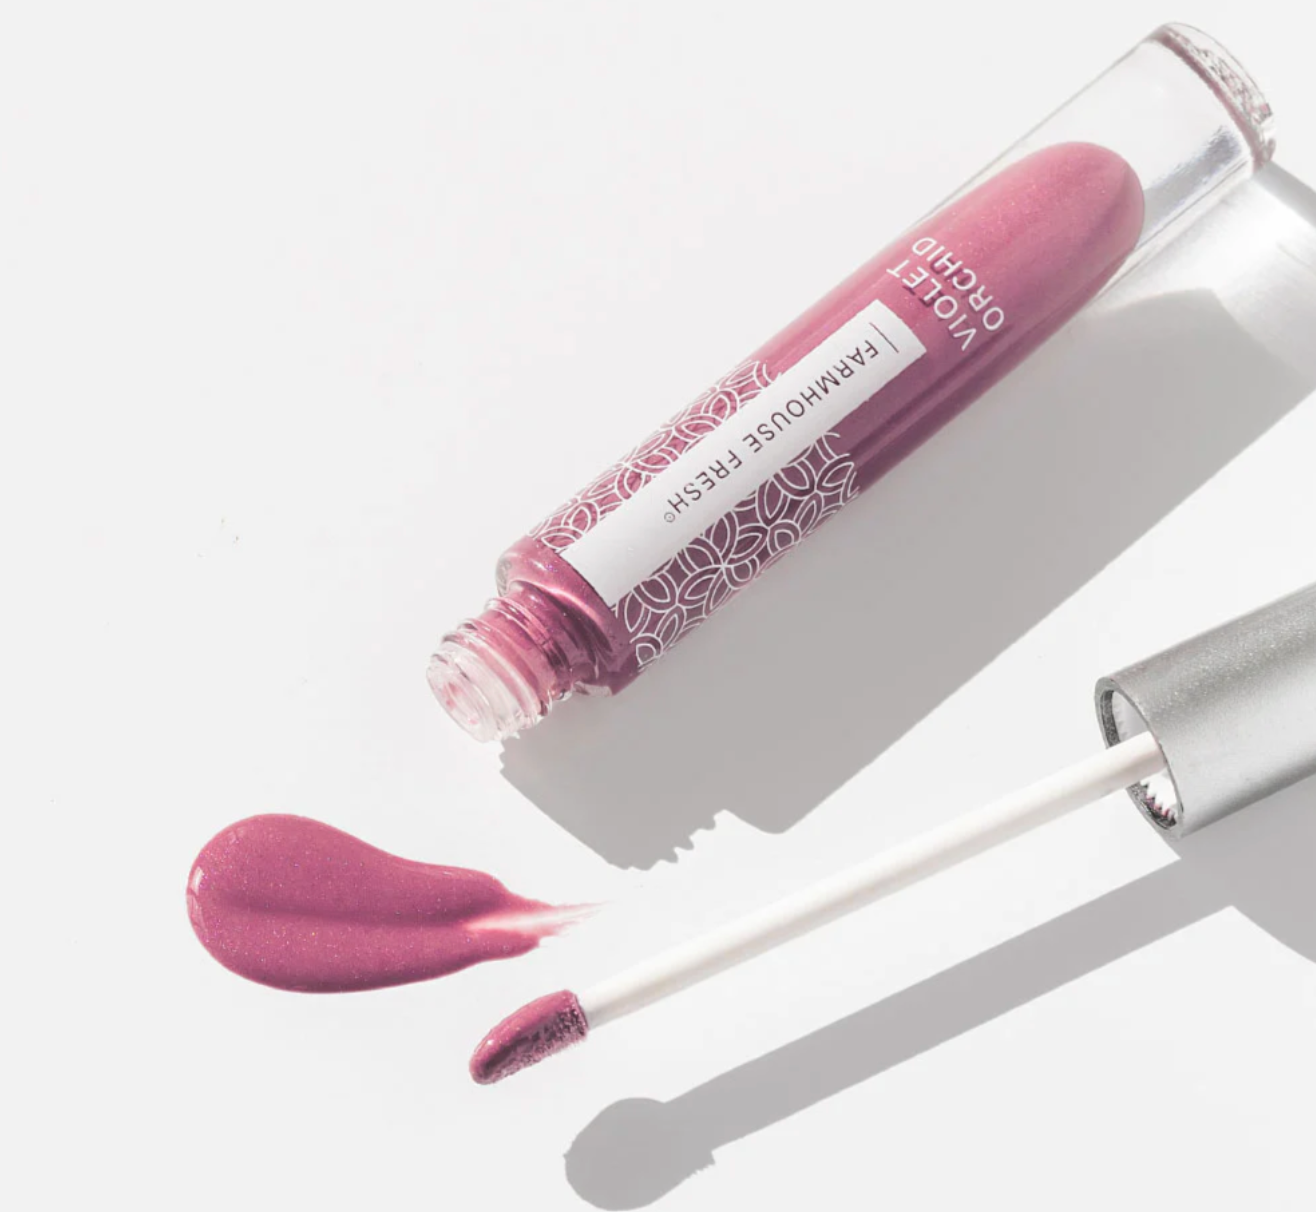 Vitamin Glaze™ Oil Infused Lip Gloss – Violet Orchid